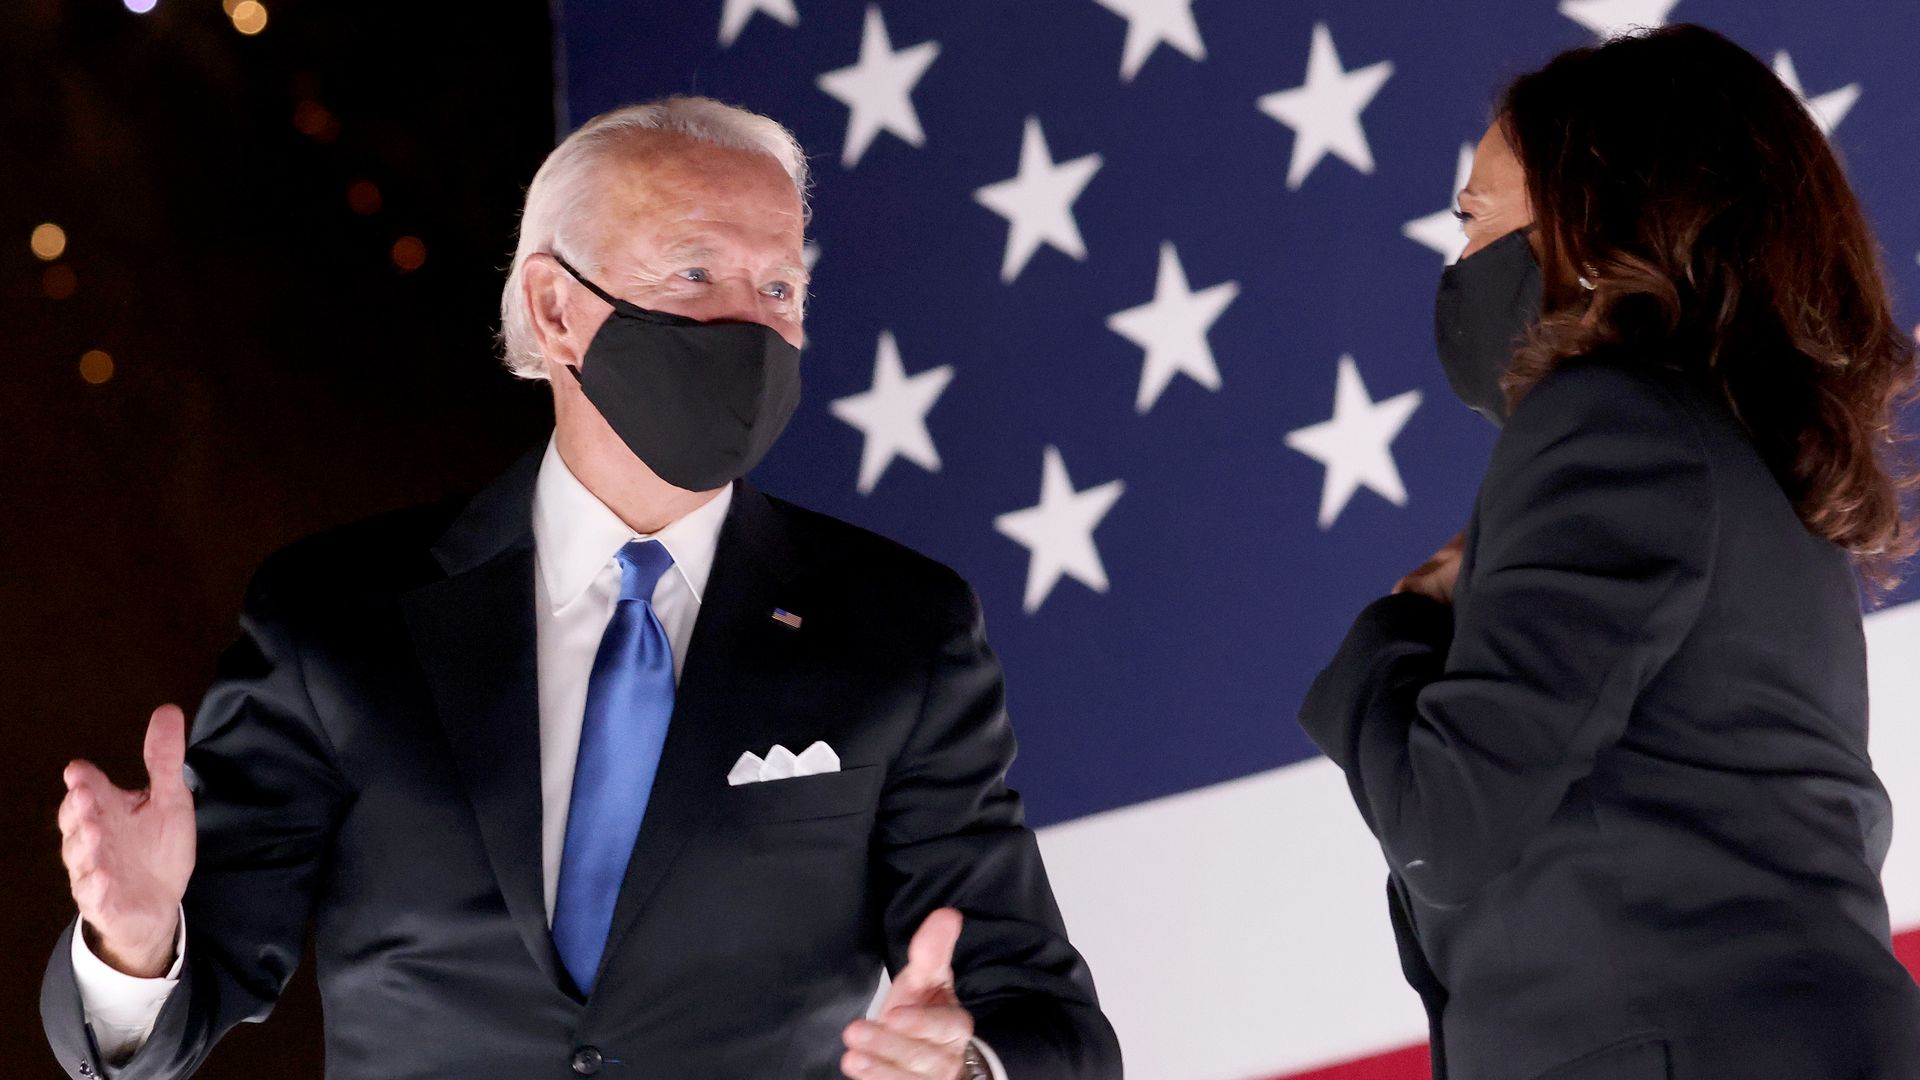 Biden and Harris stand together on stage in front of an American flag, wearing face masks